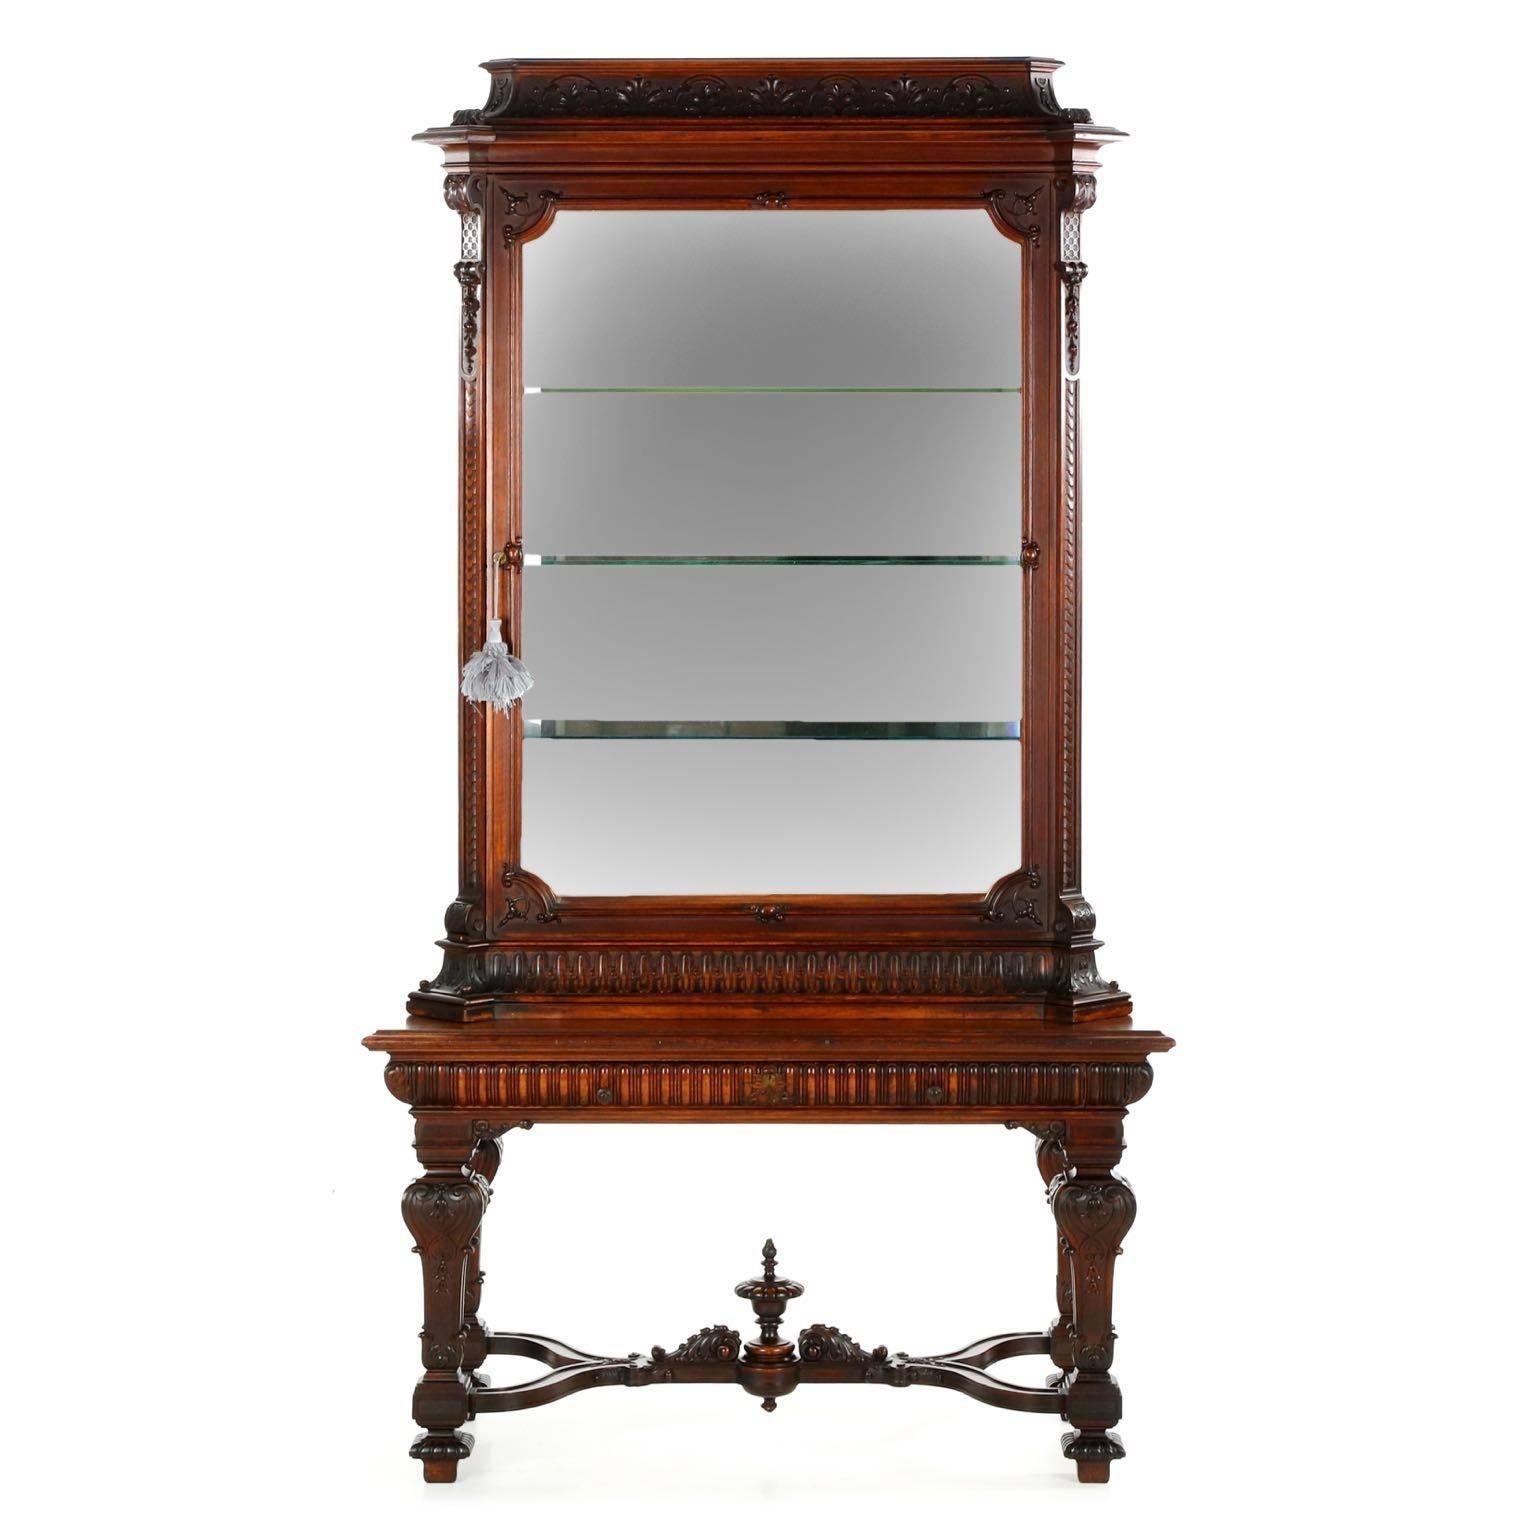 A rather unusual and inordinately fine work of the late 19th century, this display cabinet was crafted in two parts with the loose influence of Rococo evident in it’s form and motifs. The surface treatment is positively exceptional, the carver